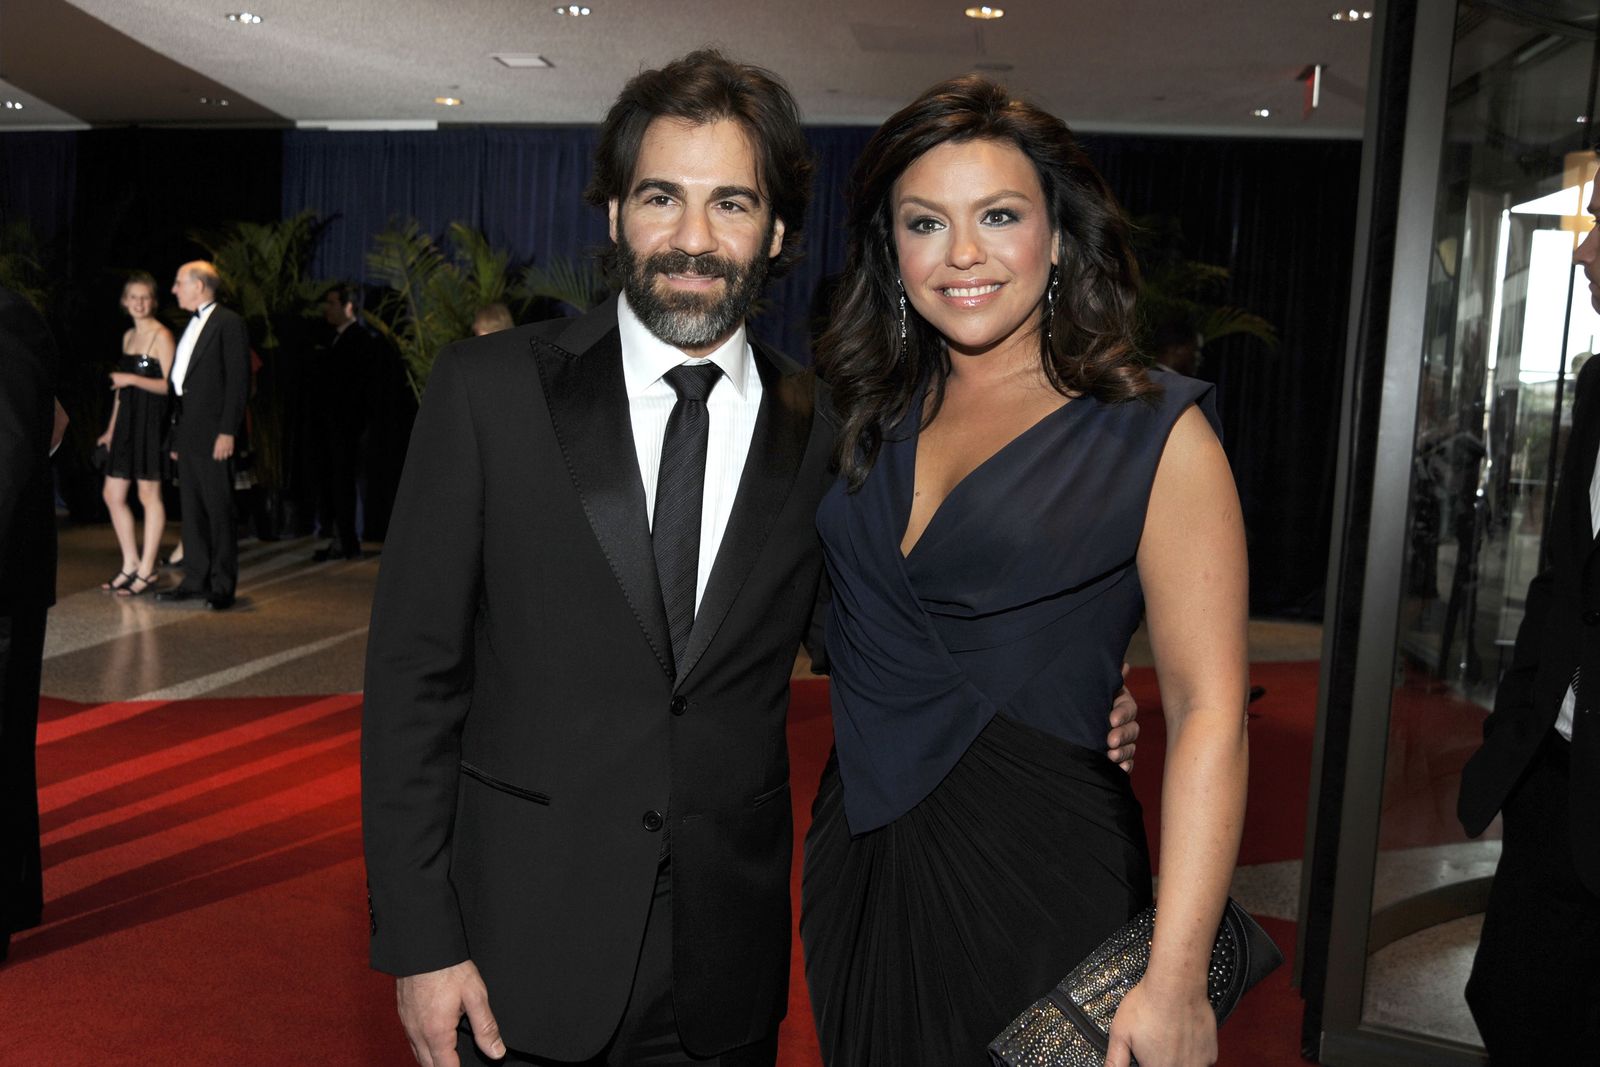 John Cusimano and Rachael Ray at The 2010 WHITE HOUSE CORRESPONDENT'S DINNER on May 1st, 2010 | Photo: Getty Images